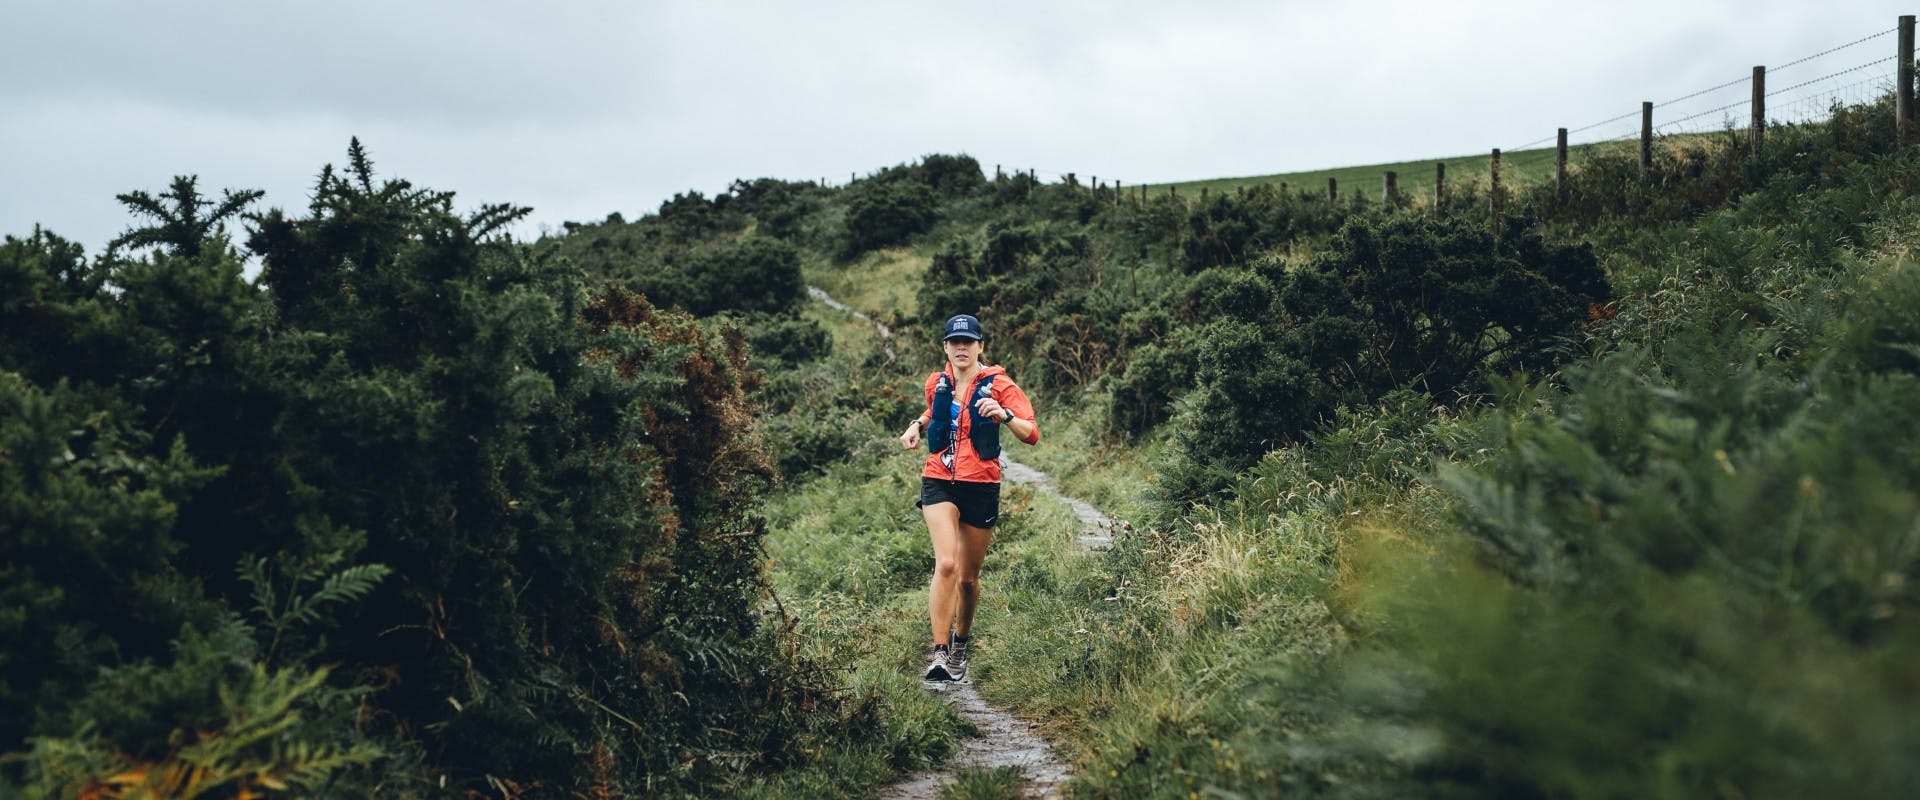 training-for-the-tds-trail-race-anna-wiles